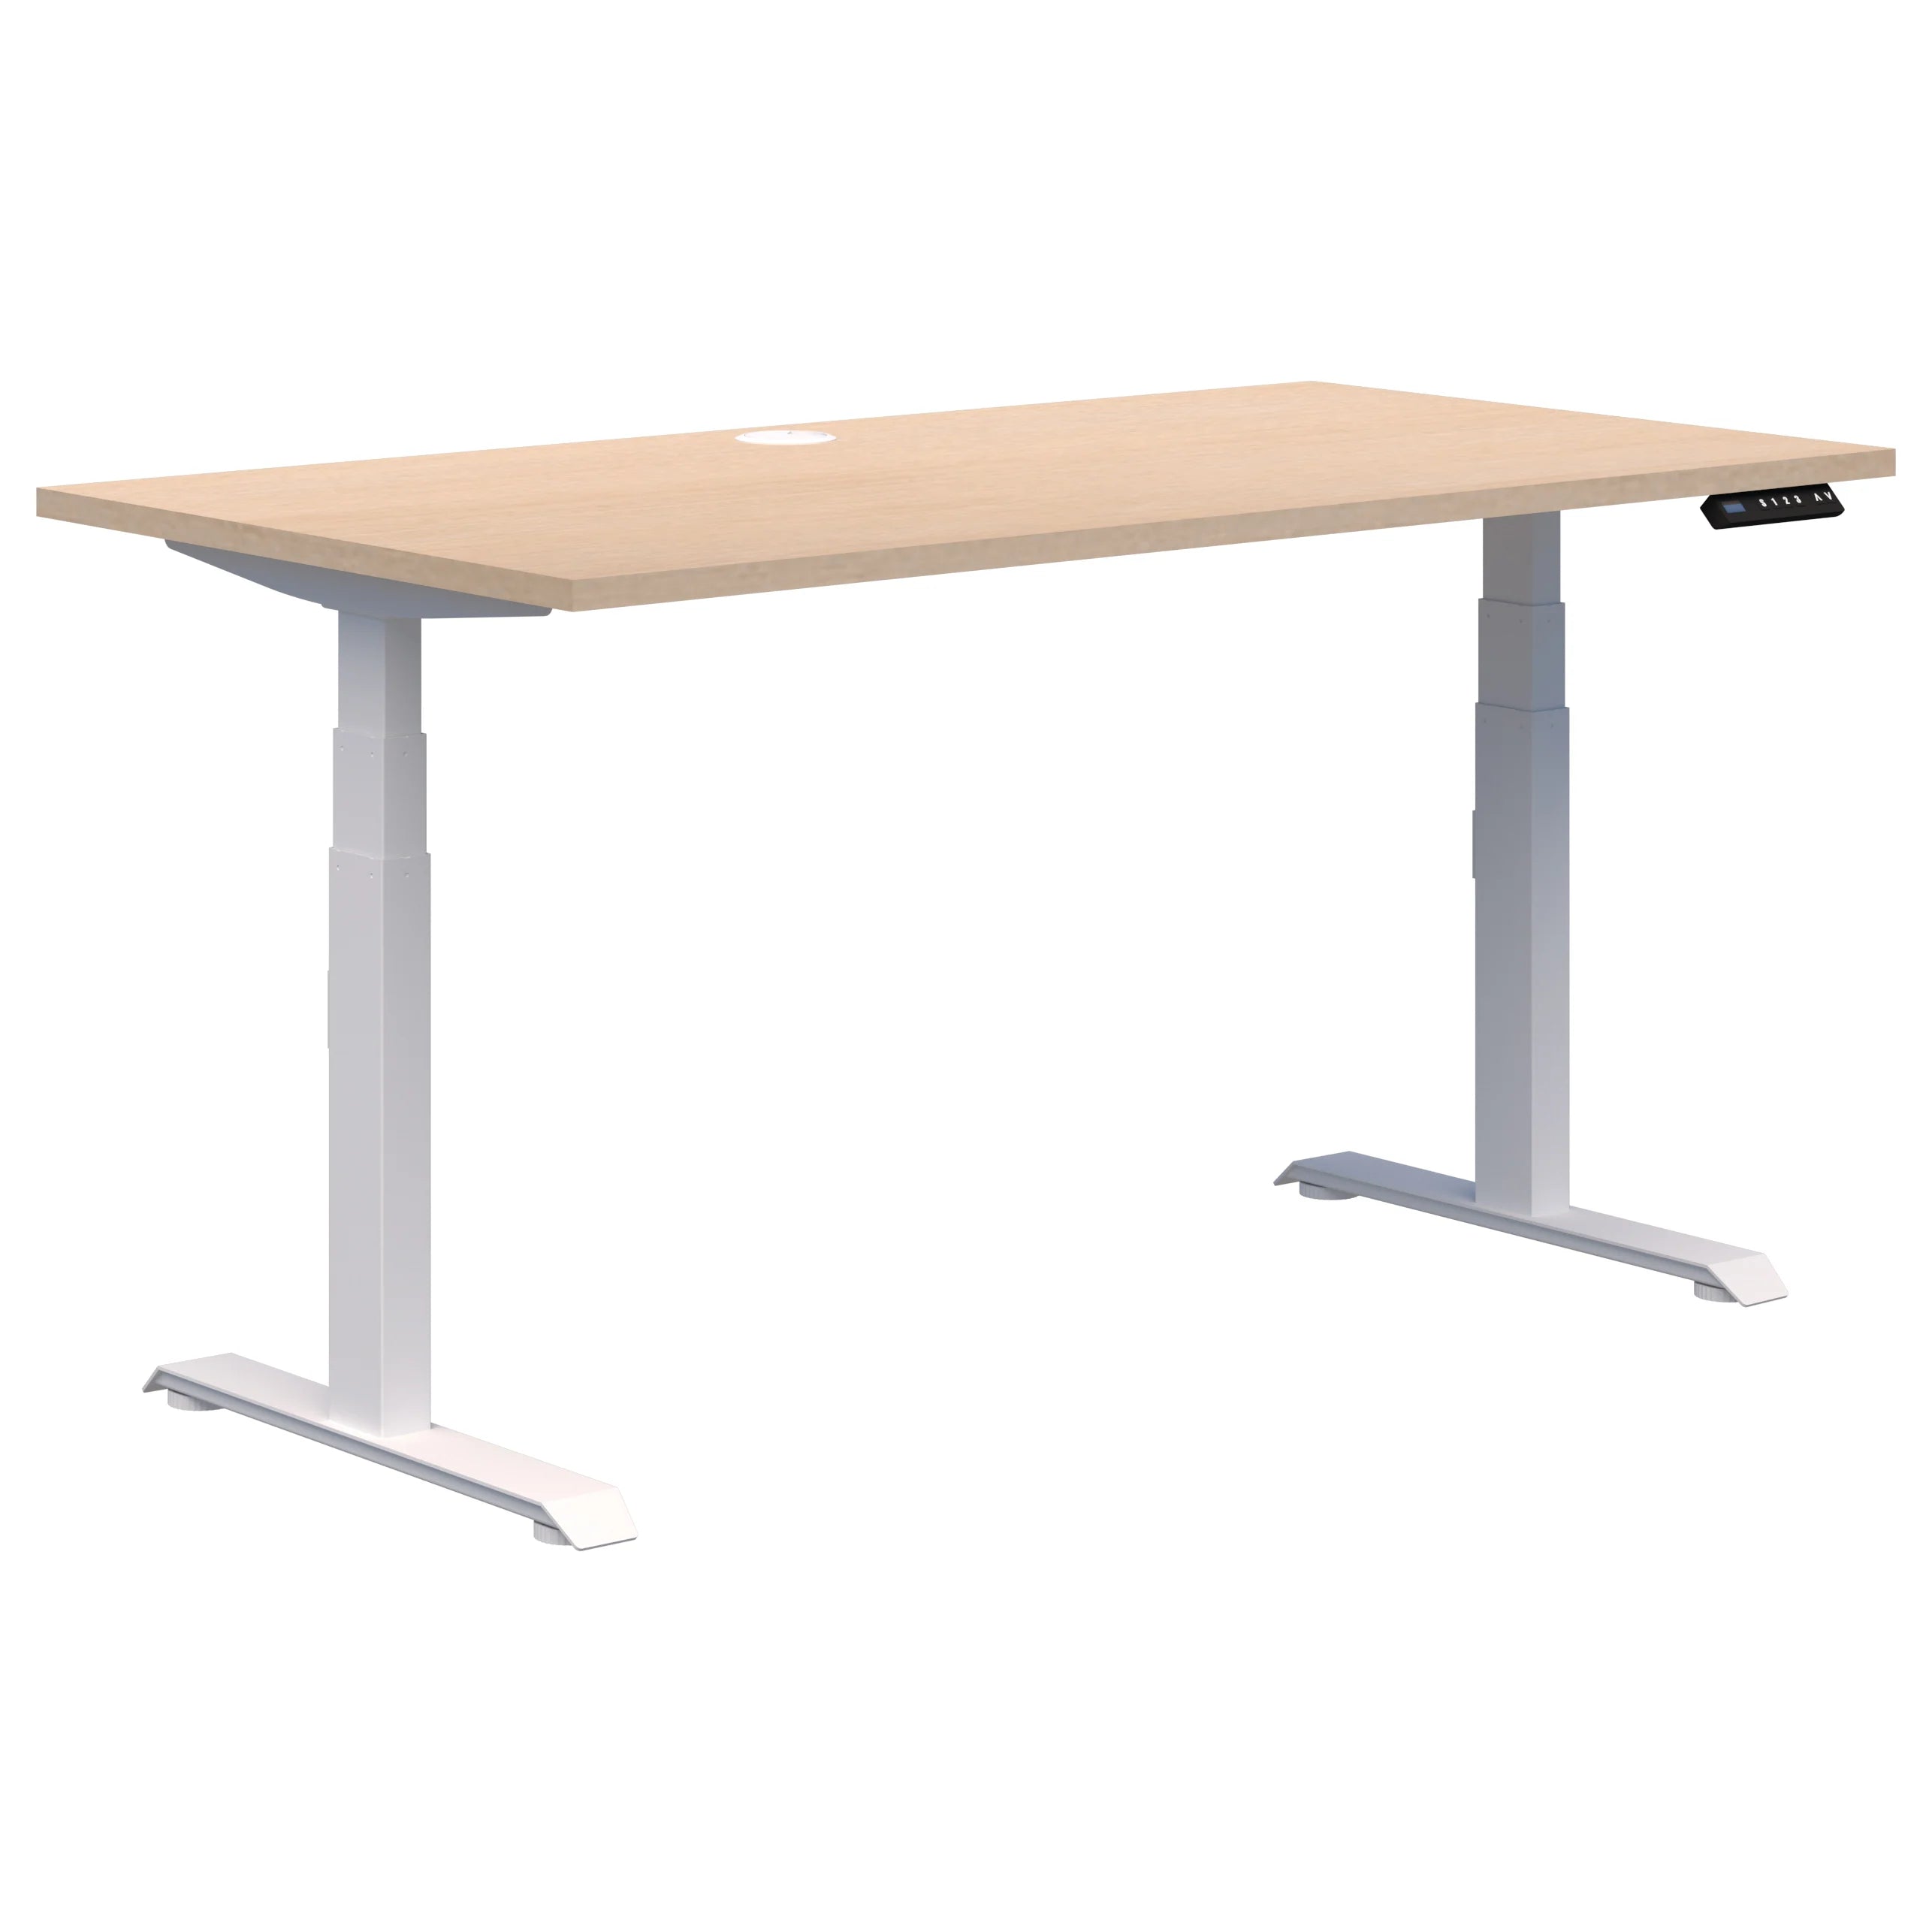 Summit electric height adjustable office desk with white frame and refined oak top.